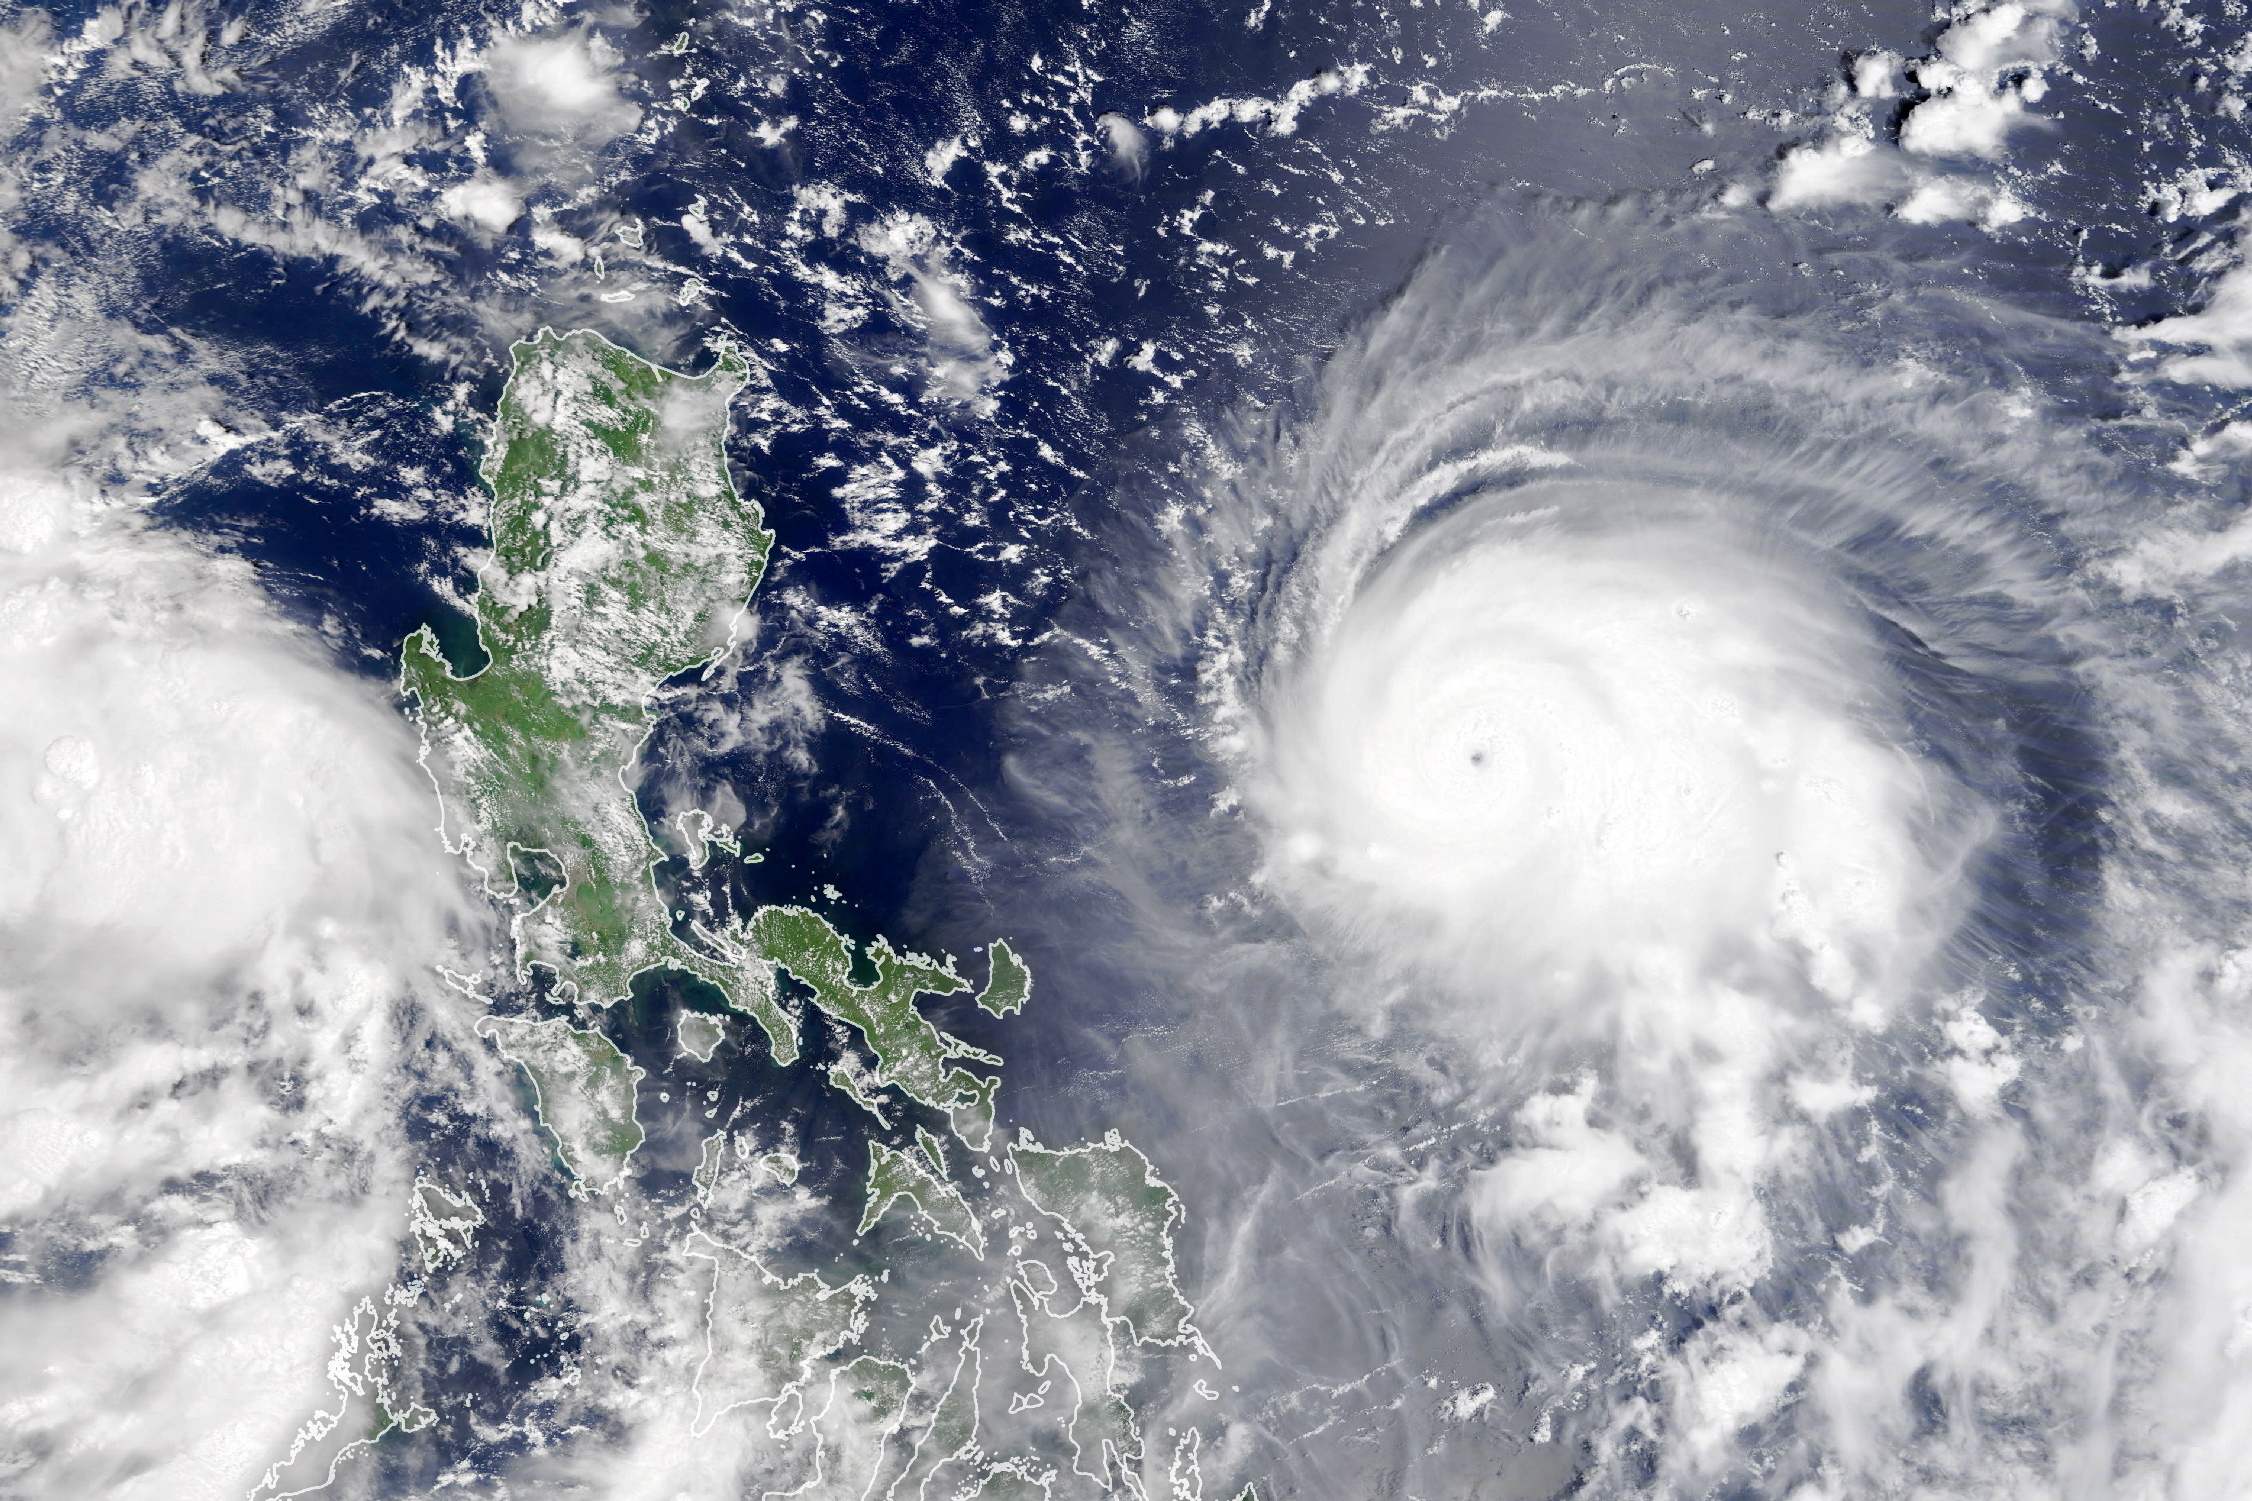 epa09459010 A handout satellite imaget made available by the National Aeronautics and Space Administration (NASA) of typhoon Chanthu as it churned the Philippine Sea, 09 September 2021 (issued 10 September 2021). On 09 September, by 11 p.m. Philippine Standard Time (1500 Universal Time), the typhoon was about 550 km east-northeast of Manila, with sustained winds of 220 kph. The typhoon, named 'Kiko' in the Philippines, is predicted to pass just north of the island of Luzon as a category 4 storm. It is likely to arrive at Taiwan on 11 or 12.  EPA/NASA HANDOUT  HANDOUT EDITORIAL USE ONLY/NO SALES